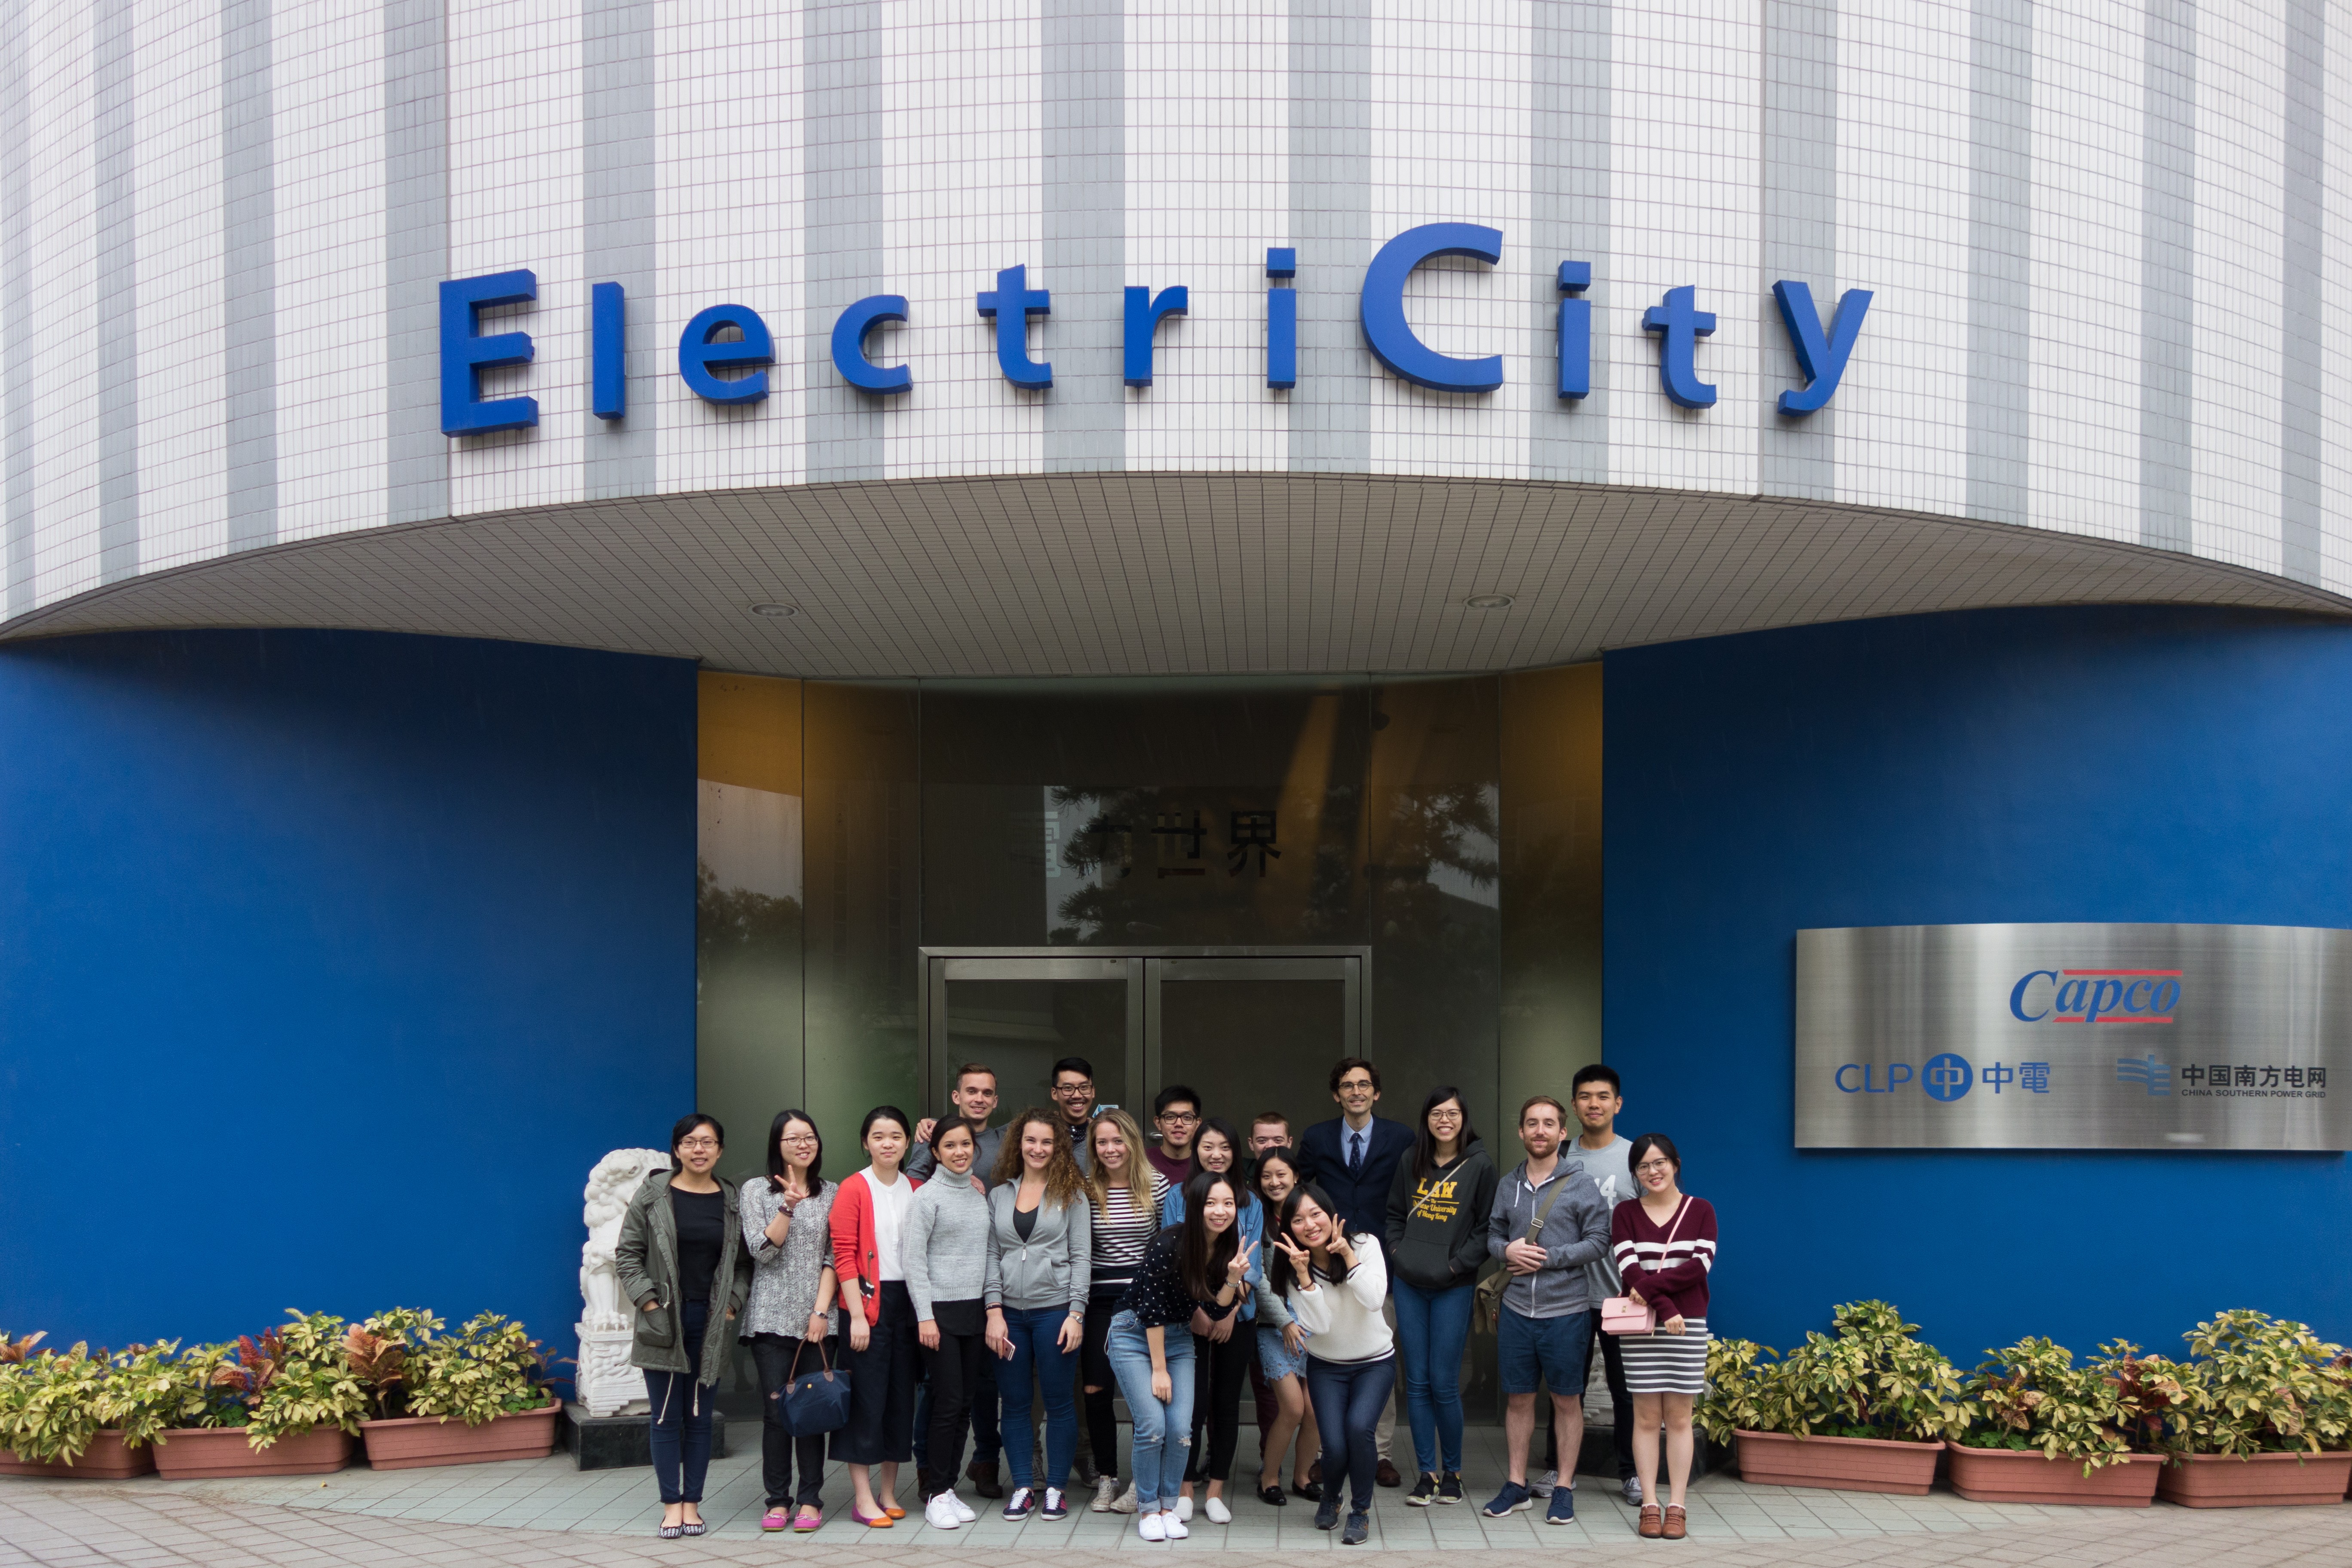 Students studying for an LLM in energy and environmental law at Chinese University go on a field trip to ElectriCity, built by CLP.